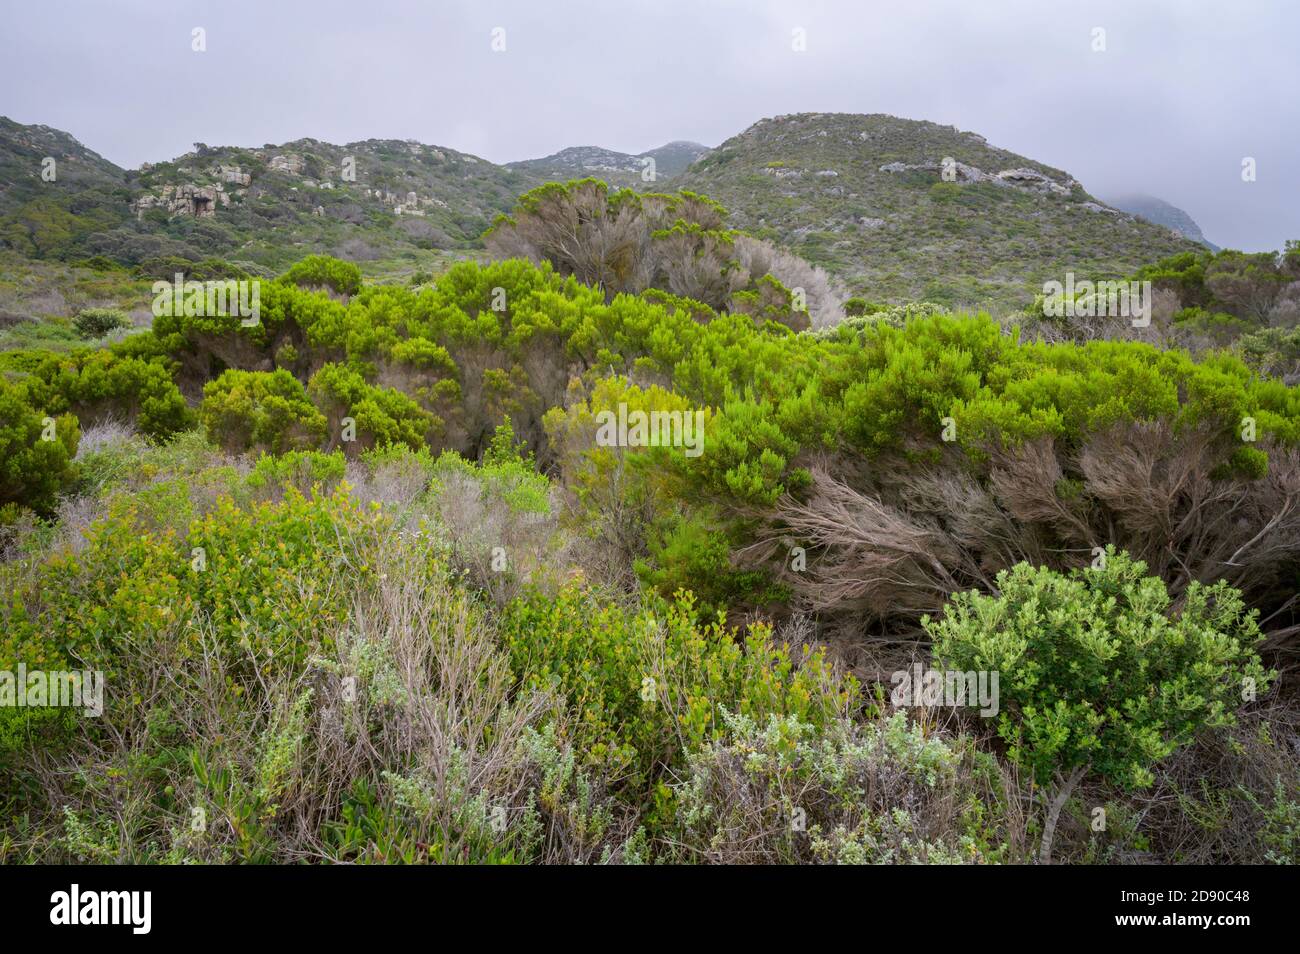 Vegetation in landscape near cape of good hope, Table mountain national park, South Africa. Stock Photo